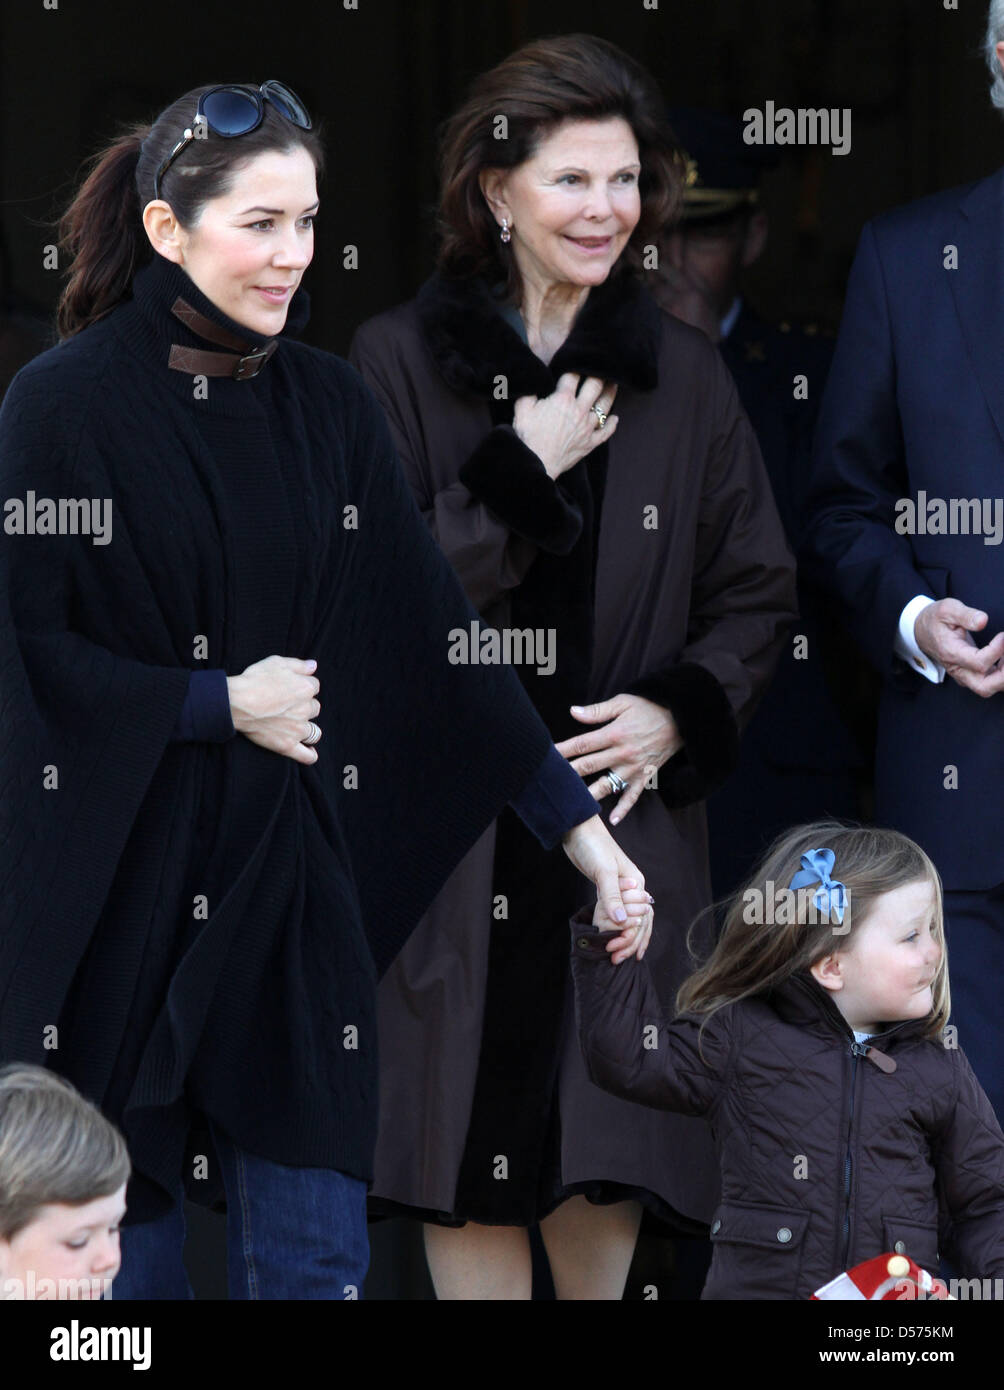 princess-mary-of-denmark-l-queen-silvia-of-sweden-c-and-princess-isabella-D575KM.jpg